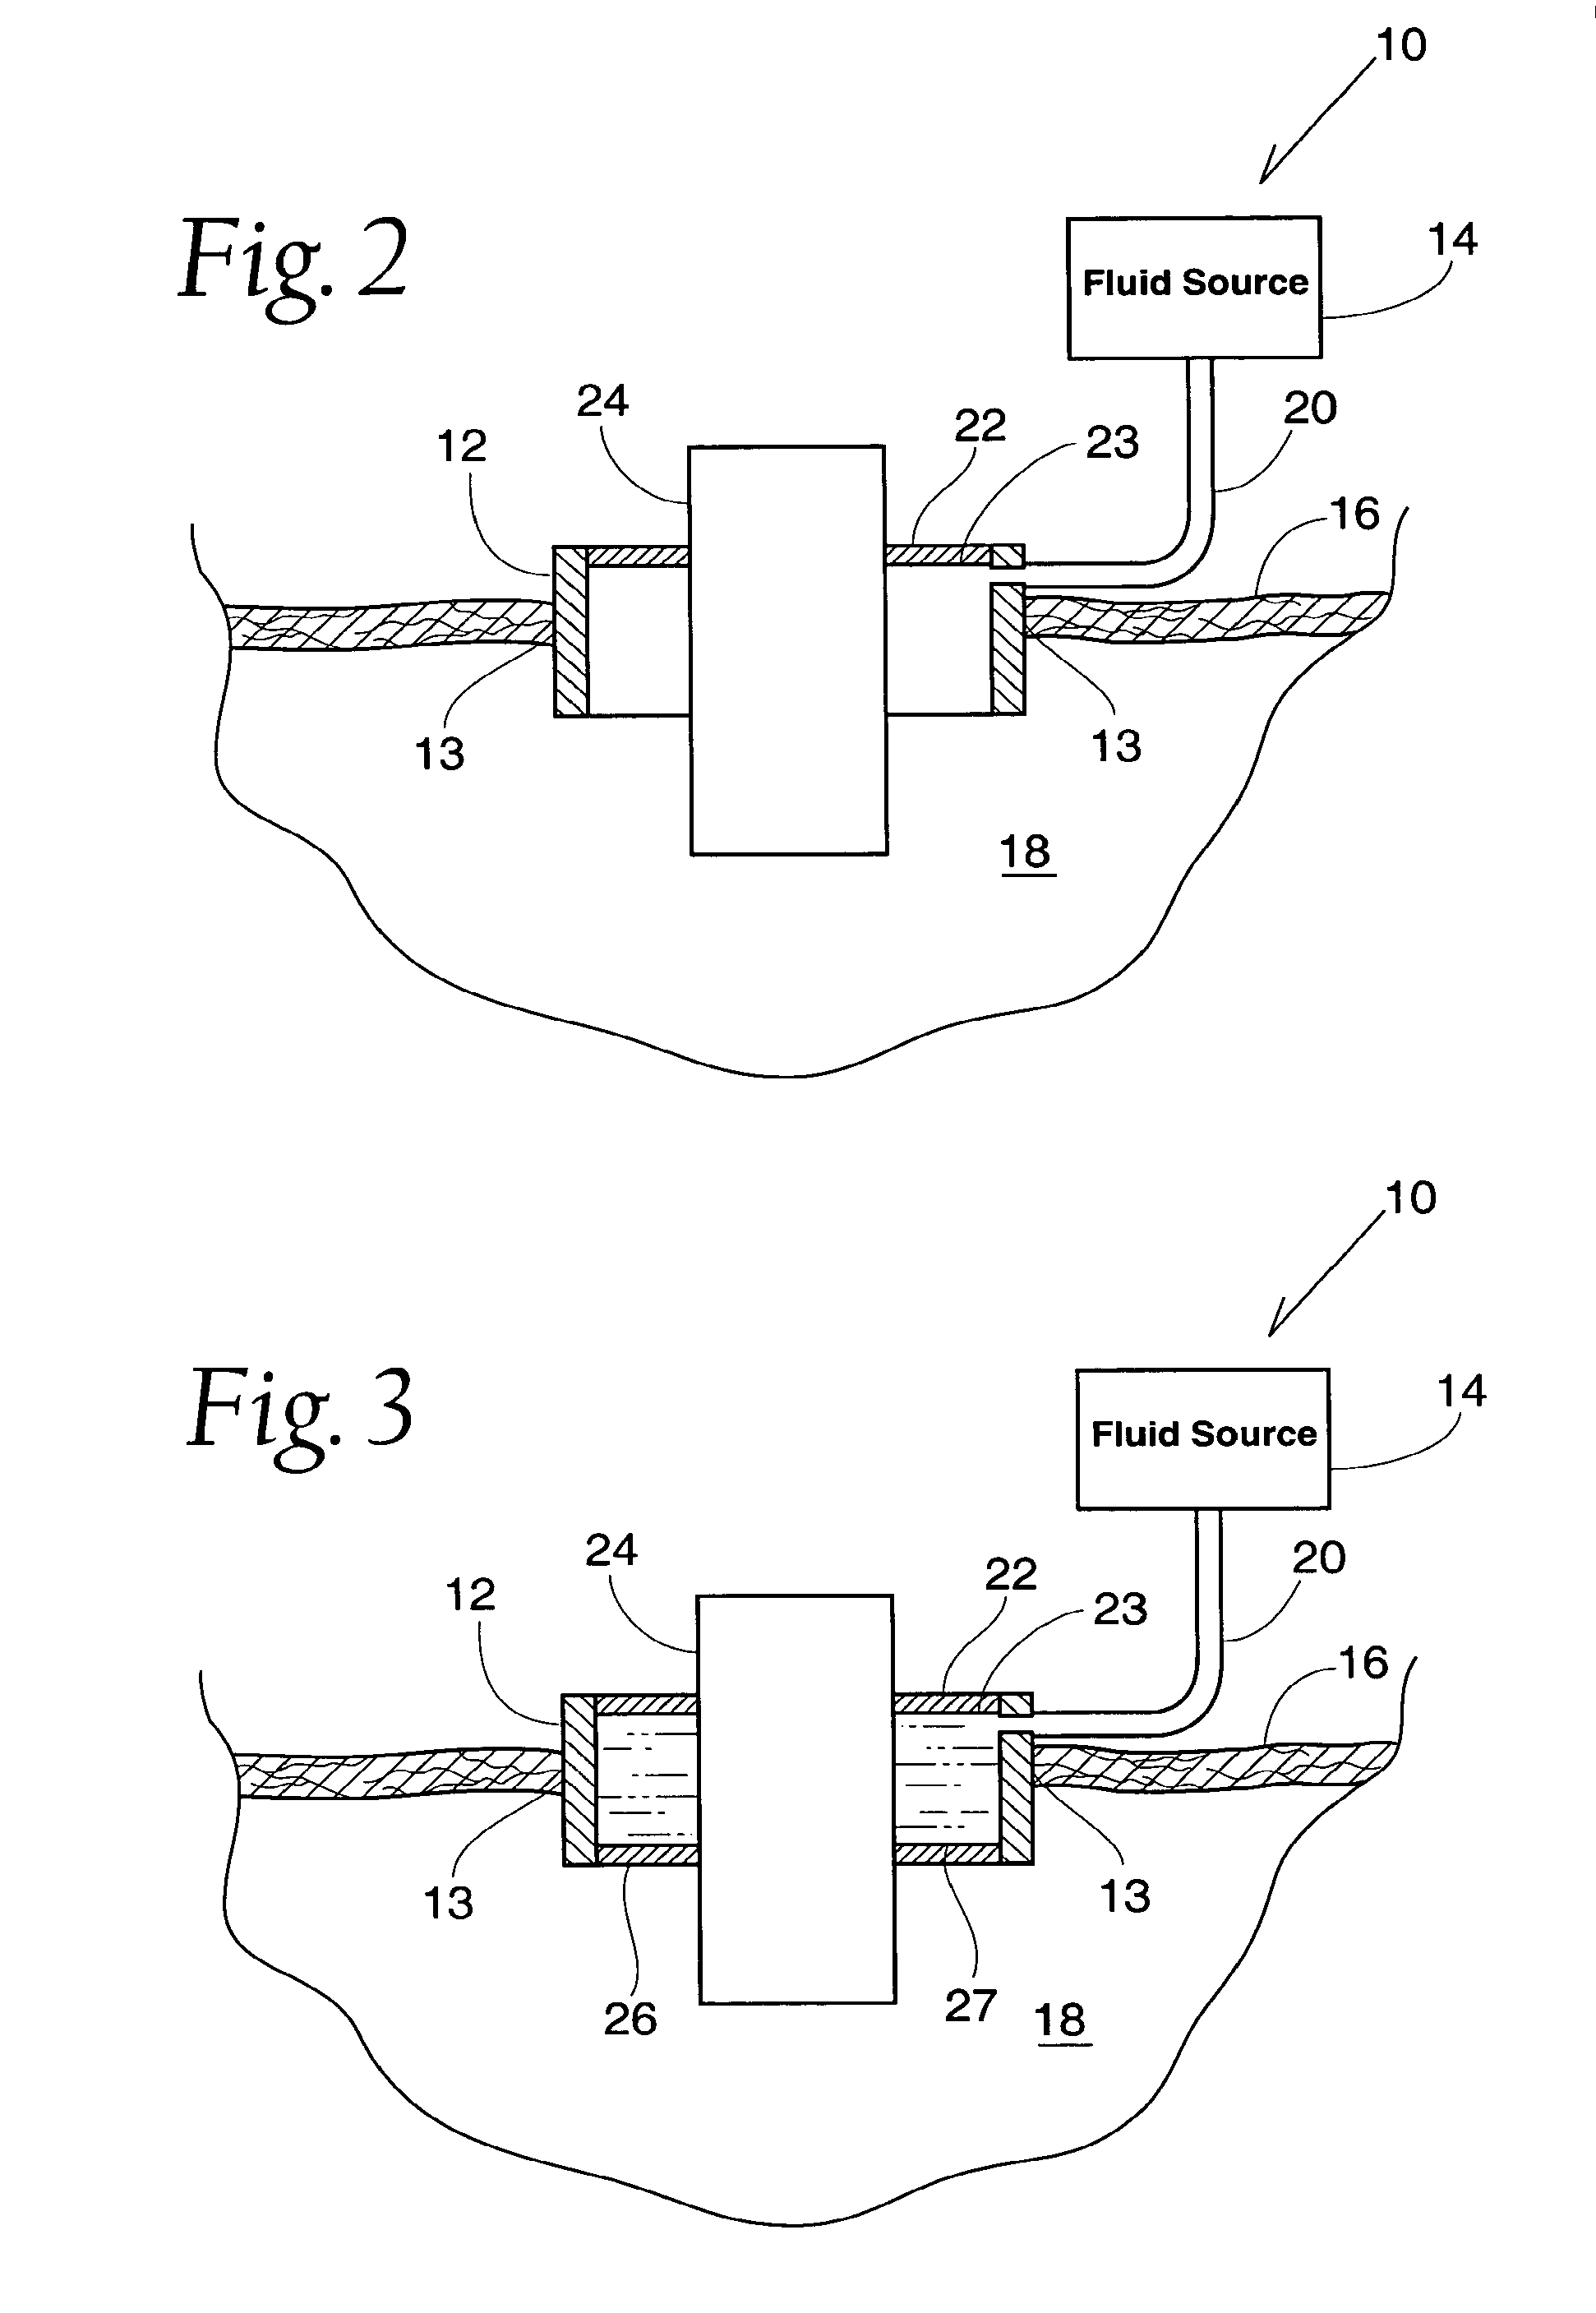 Method and Apparatus for Preventing Air Embolisms